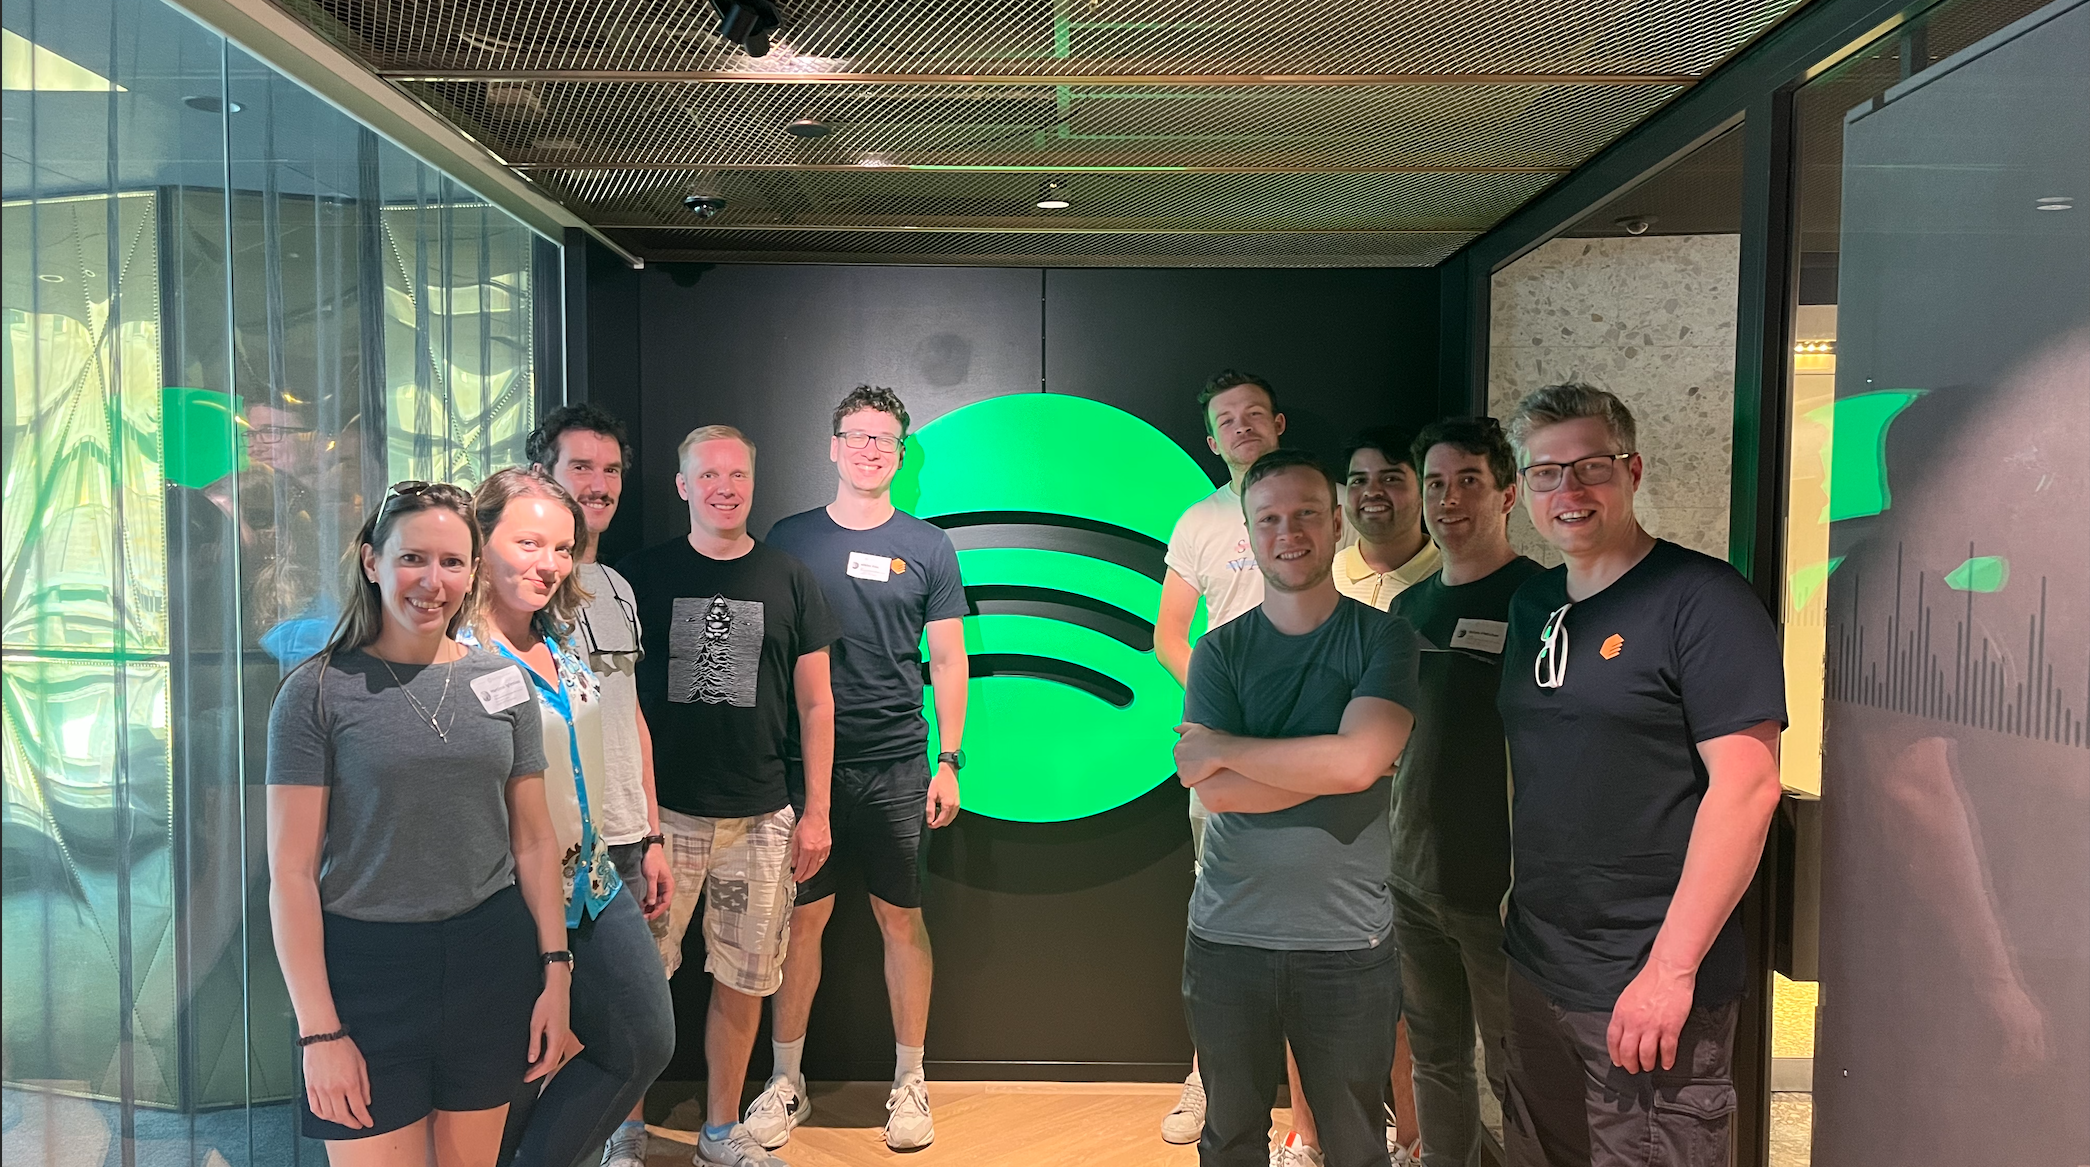 Picture: Roadie's team at Spotify's office